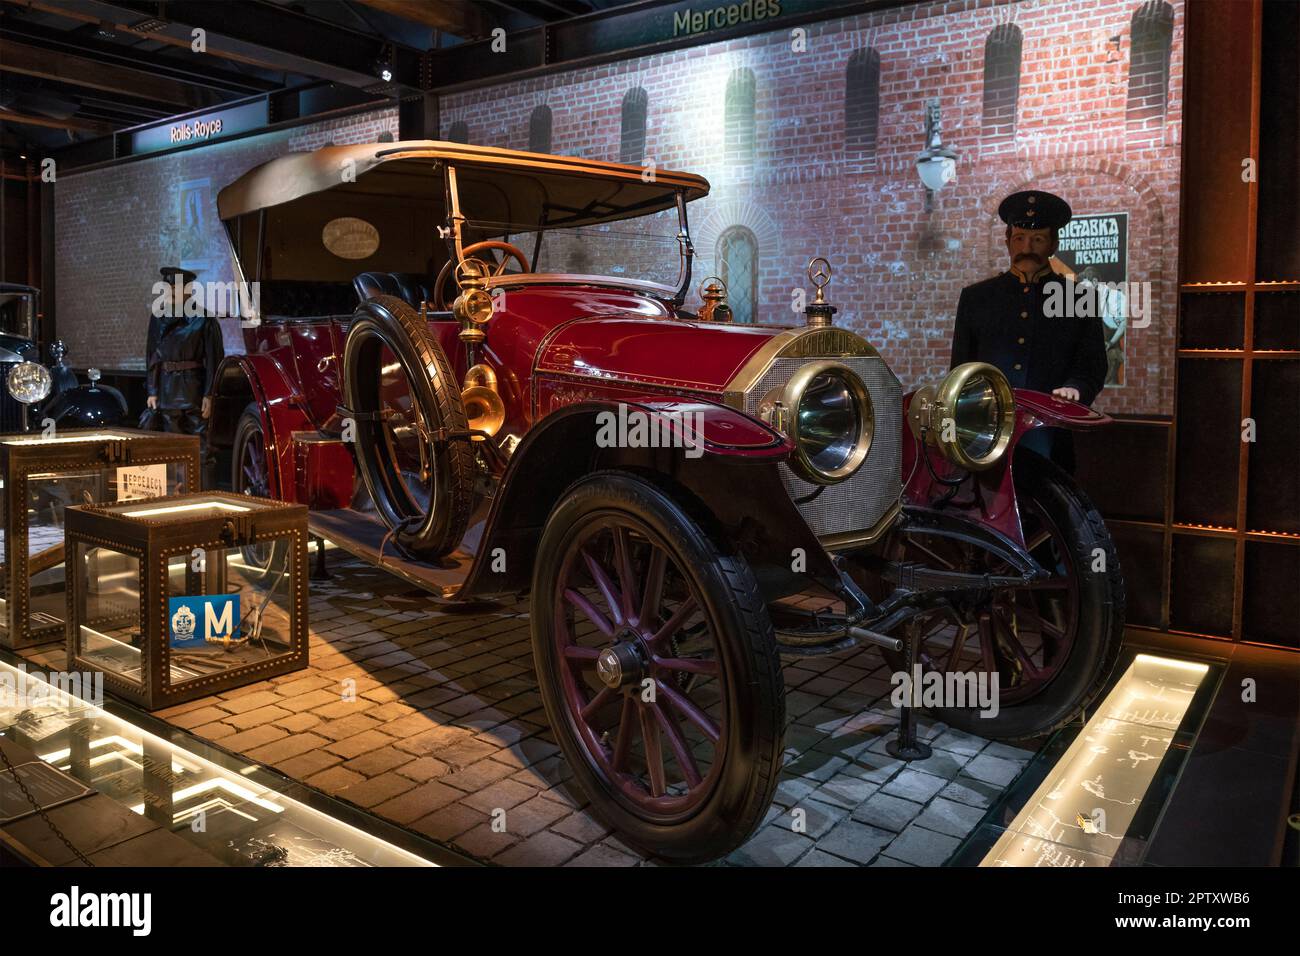 MOSCOW, RUSSIA - AUGUST 17, 2022: Vintage car Mercedes 45PS Simplex from the garage of the Russian Emperor Nicholas II. Exhibit of the Museum 'Special Stock Photo